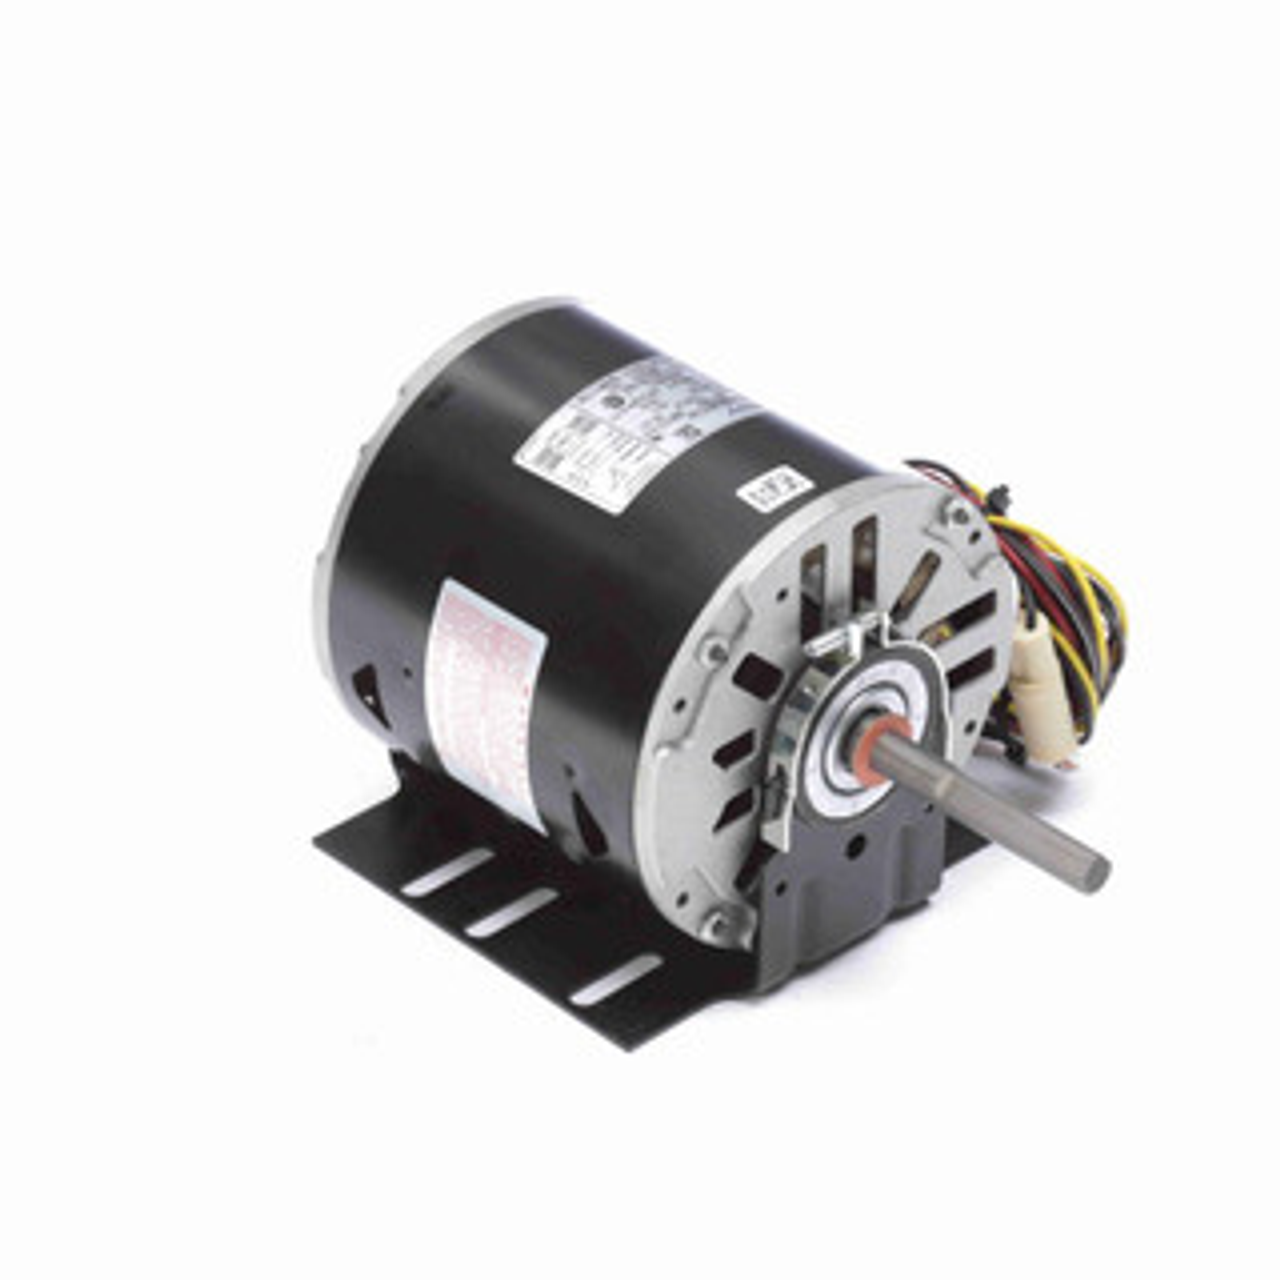 OHR1106 OEM Direct Replacement Motor